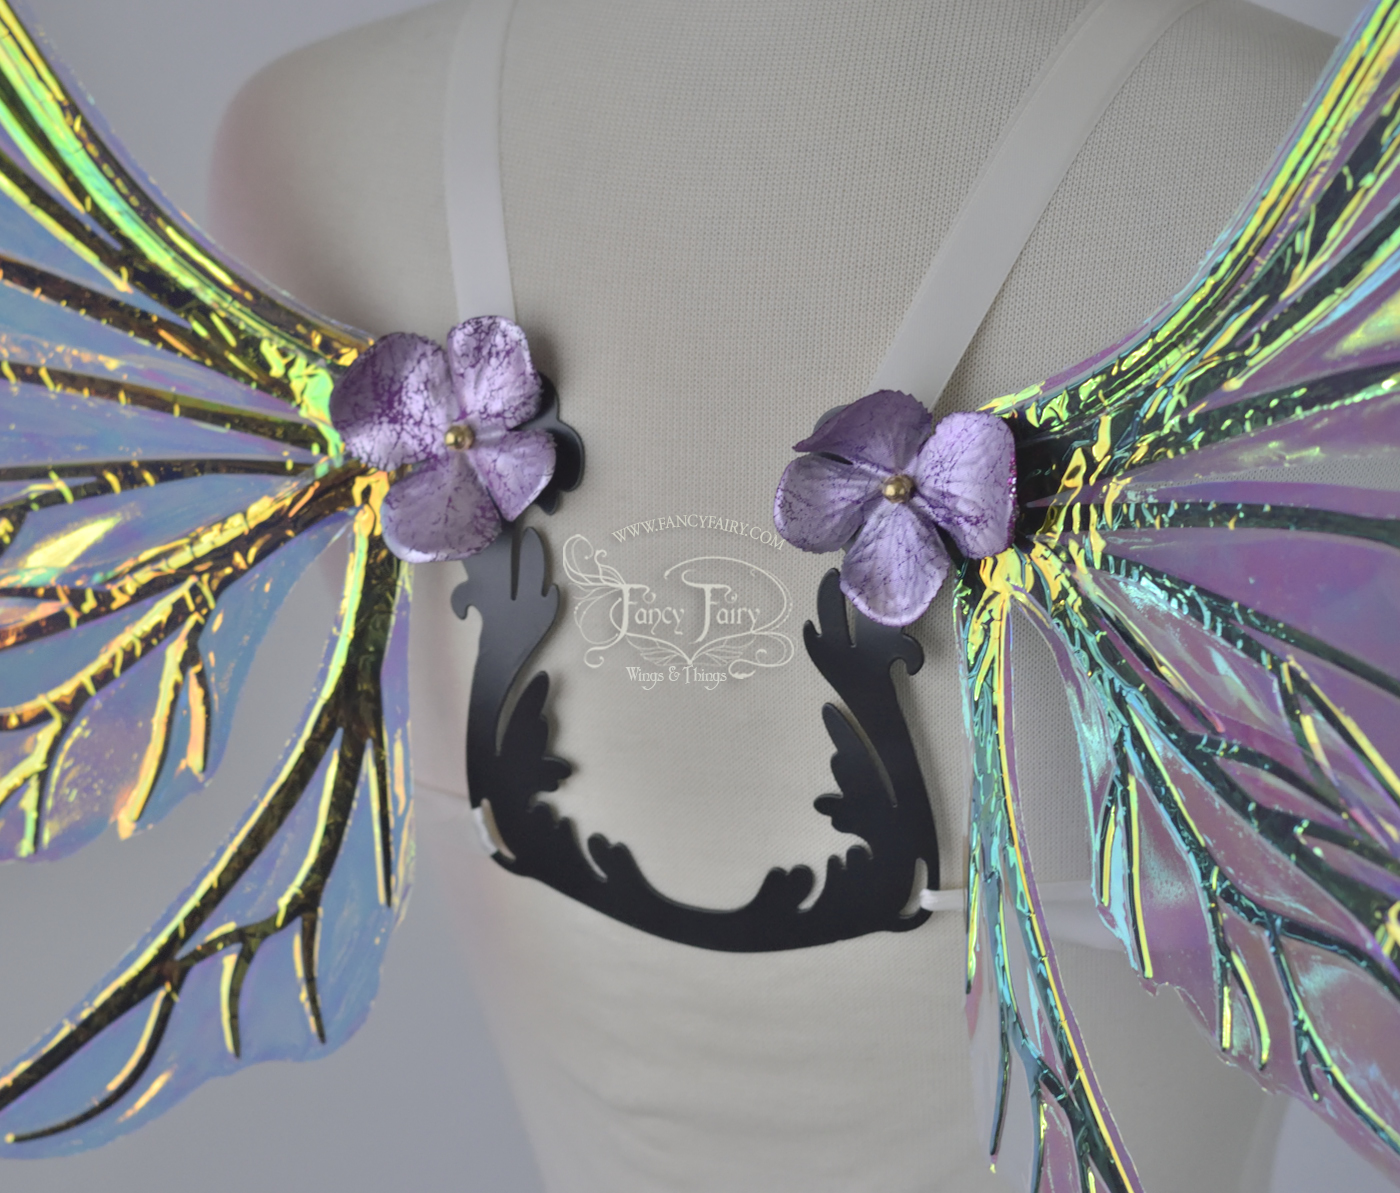 Ready to Ship Trinket 26 inch Iridescent Painted Fairy Wings in 'Celestial' with silver veins